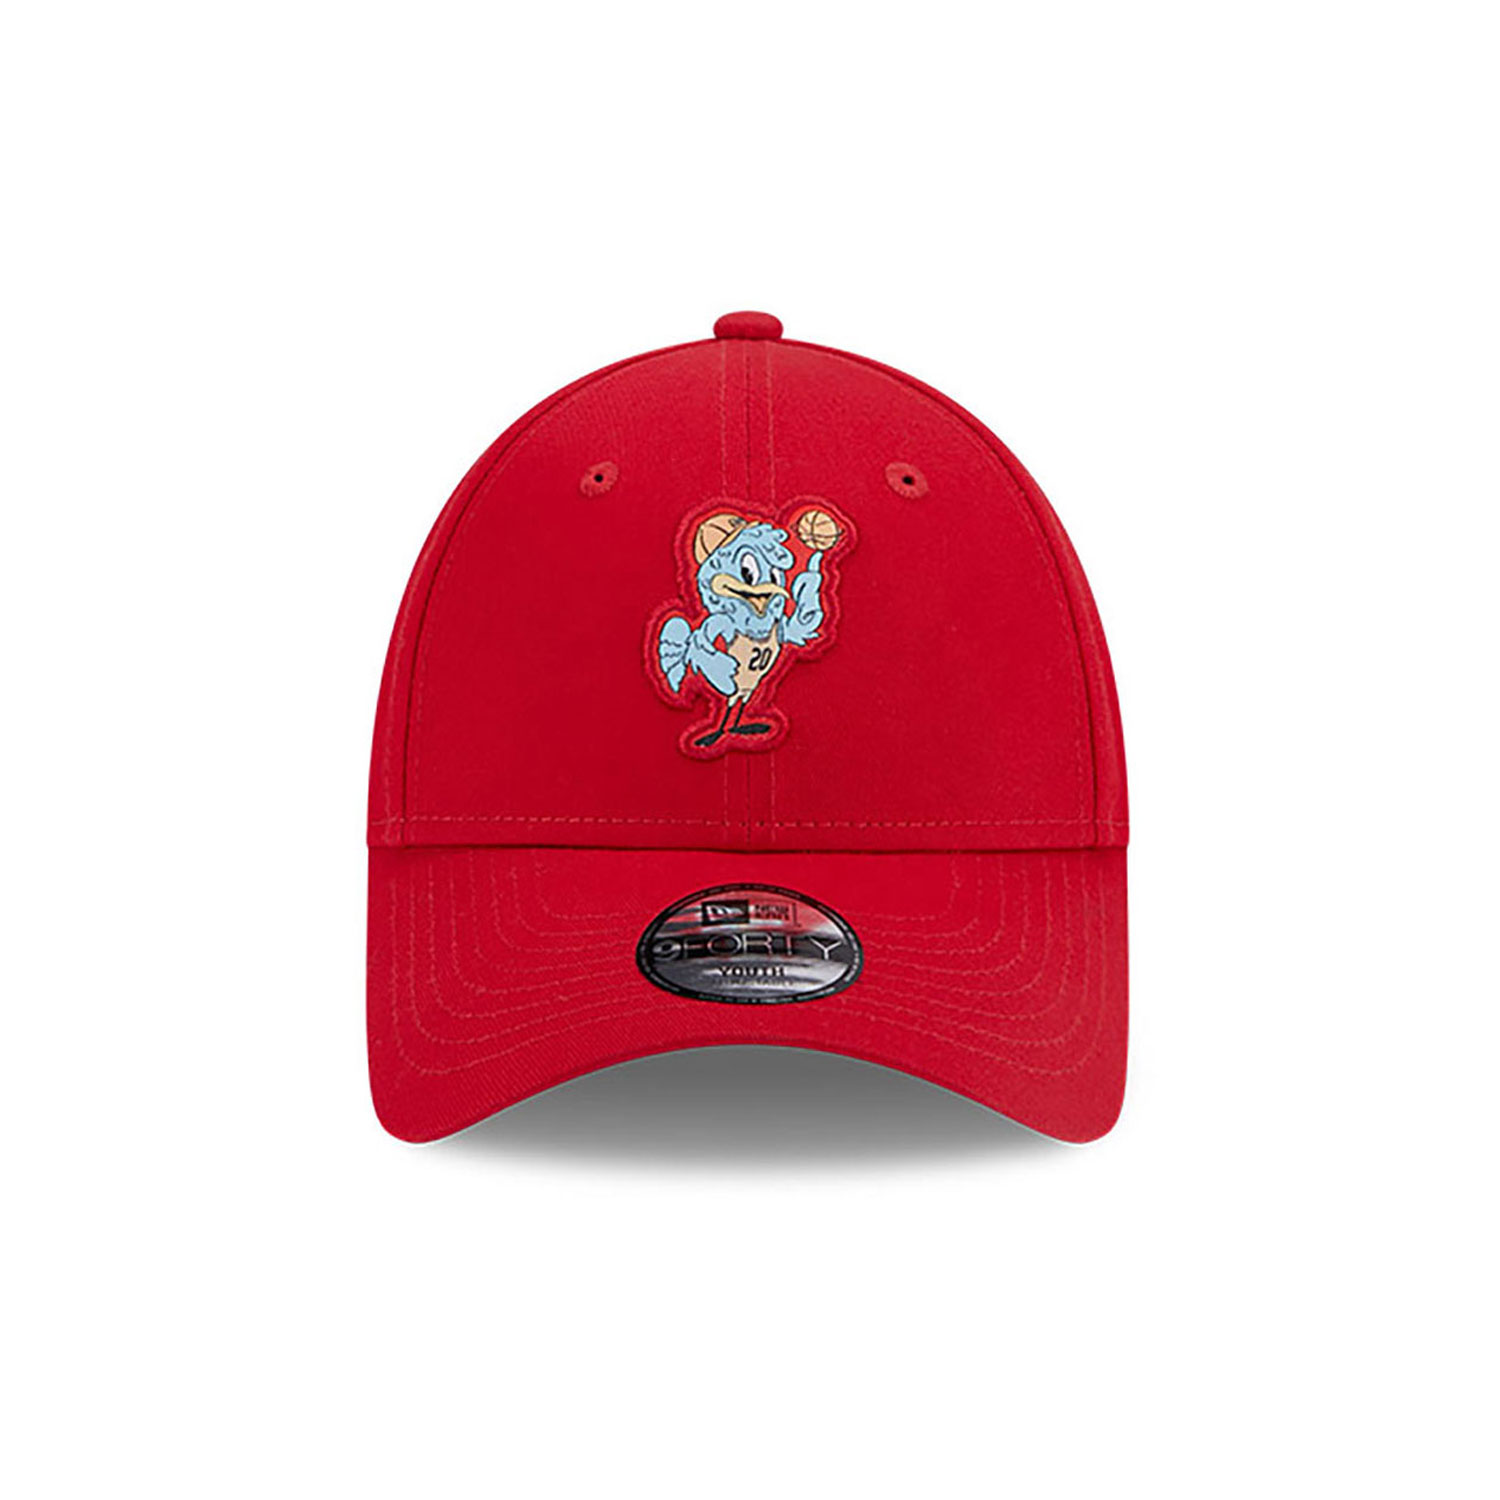 New Era Mascot Youth Red 9FORTY Adjustable Cap